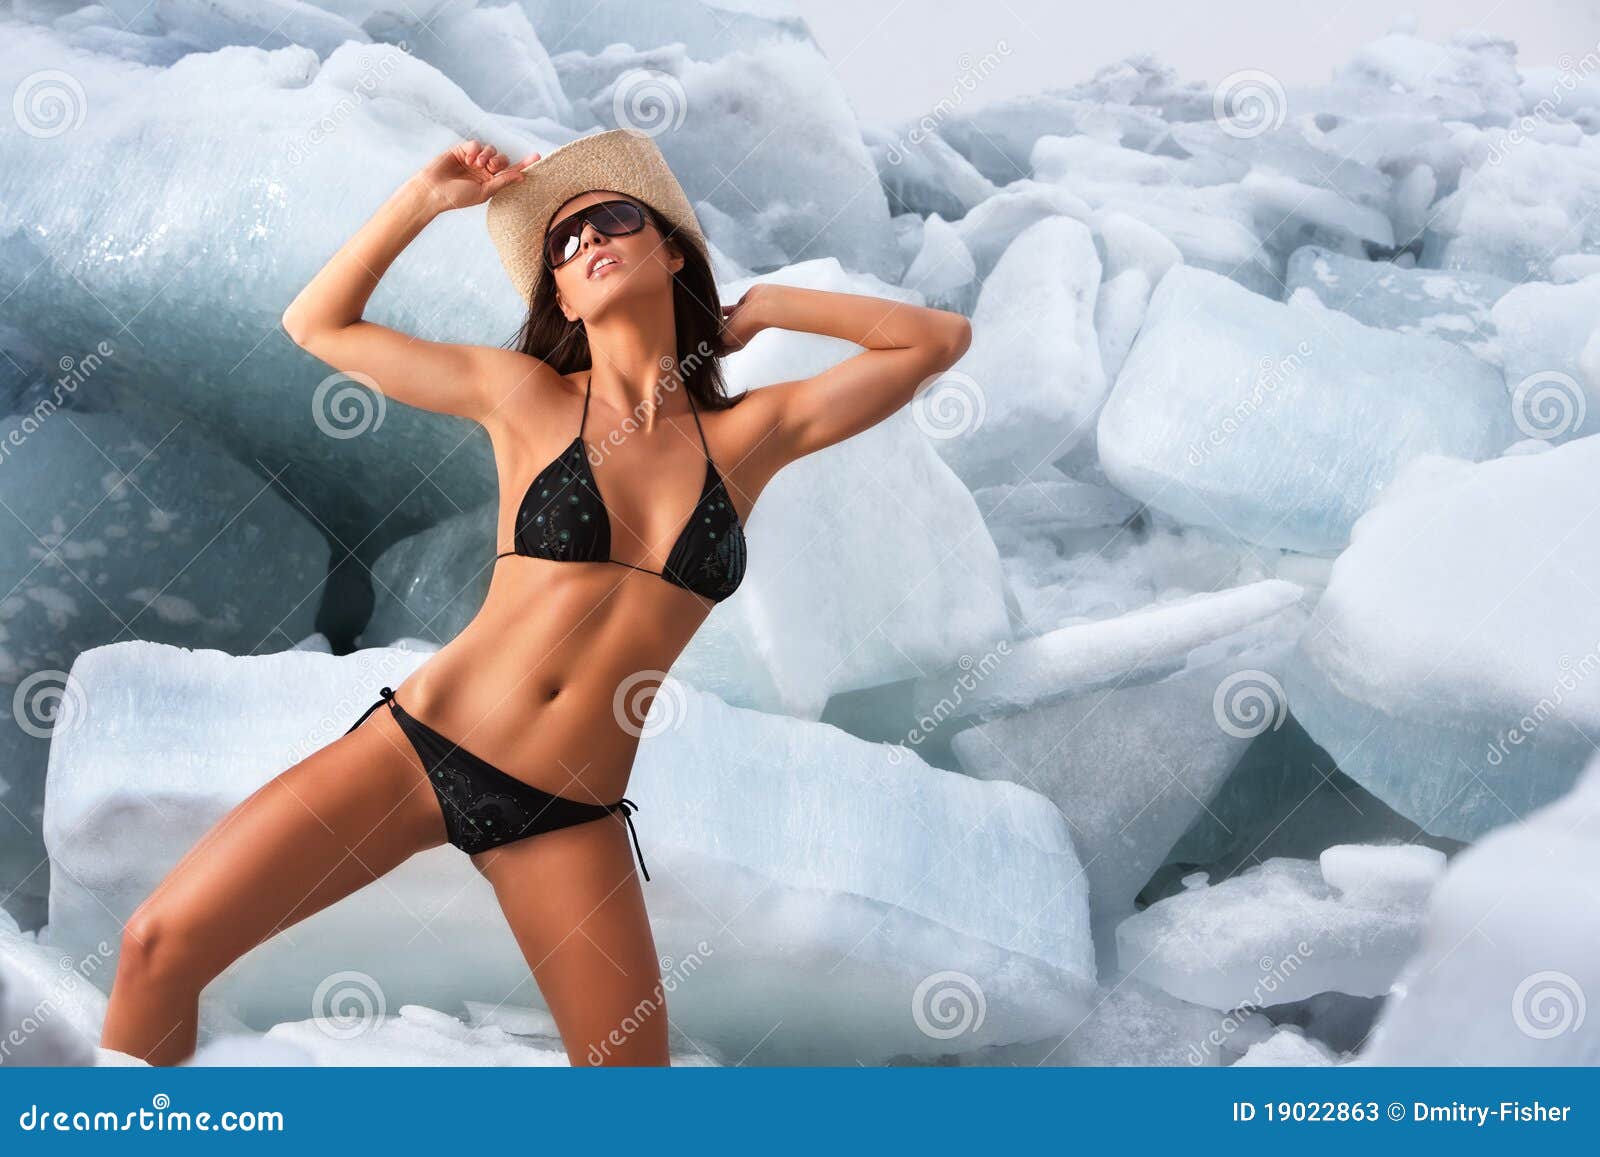 Ice Babe Picture Image 19022863